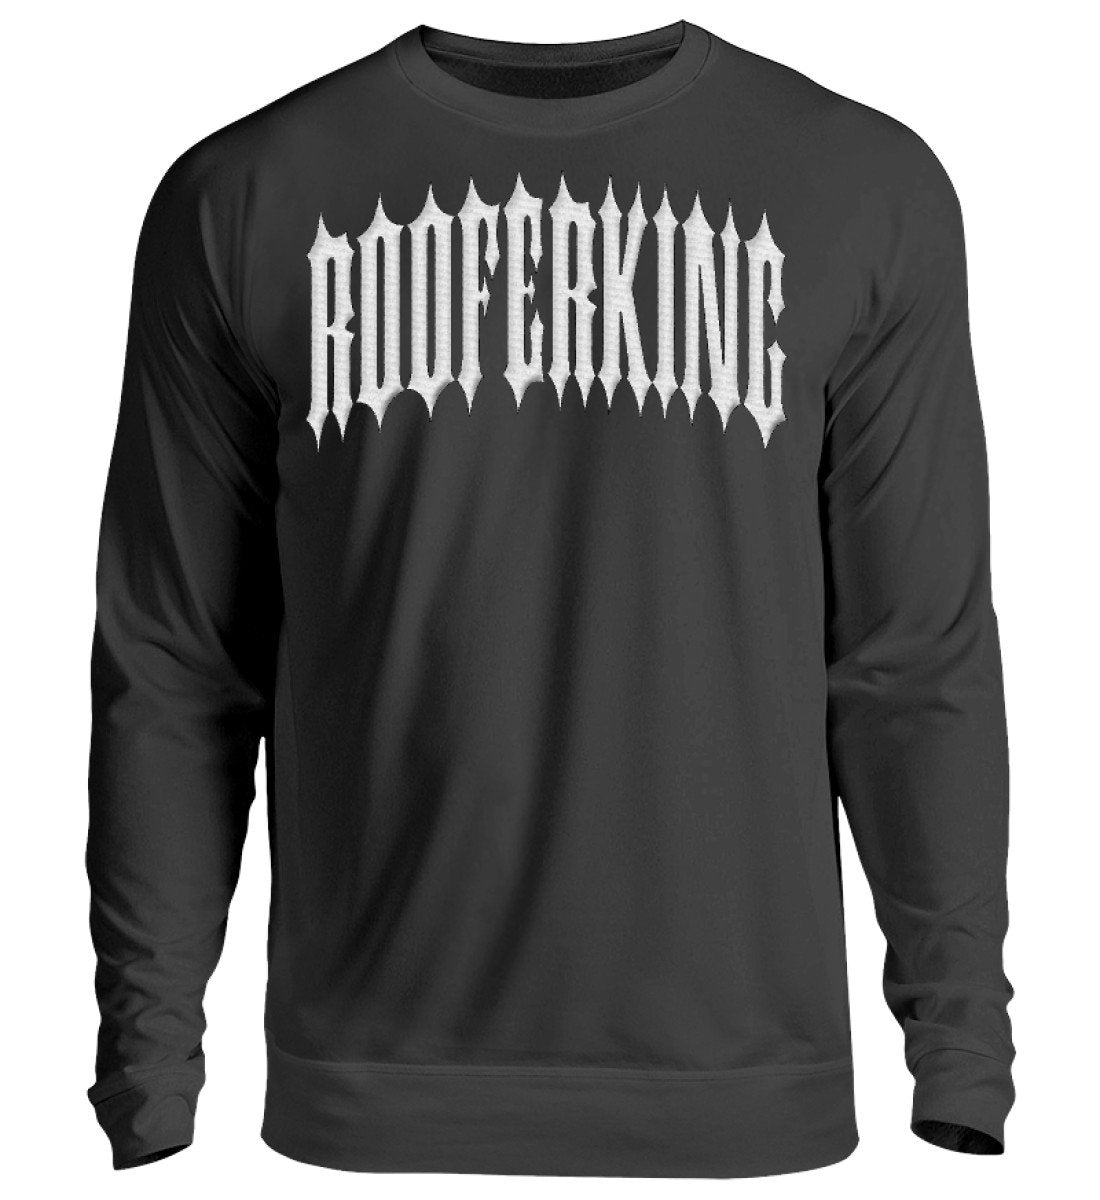 Rooferking - roofer sweatshirt with embroidery